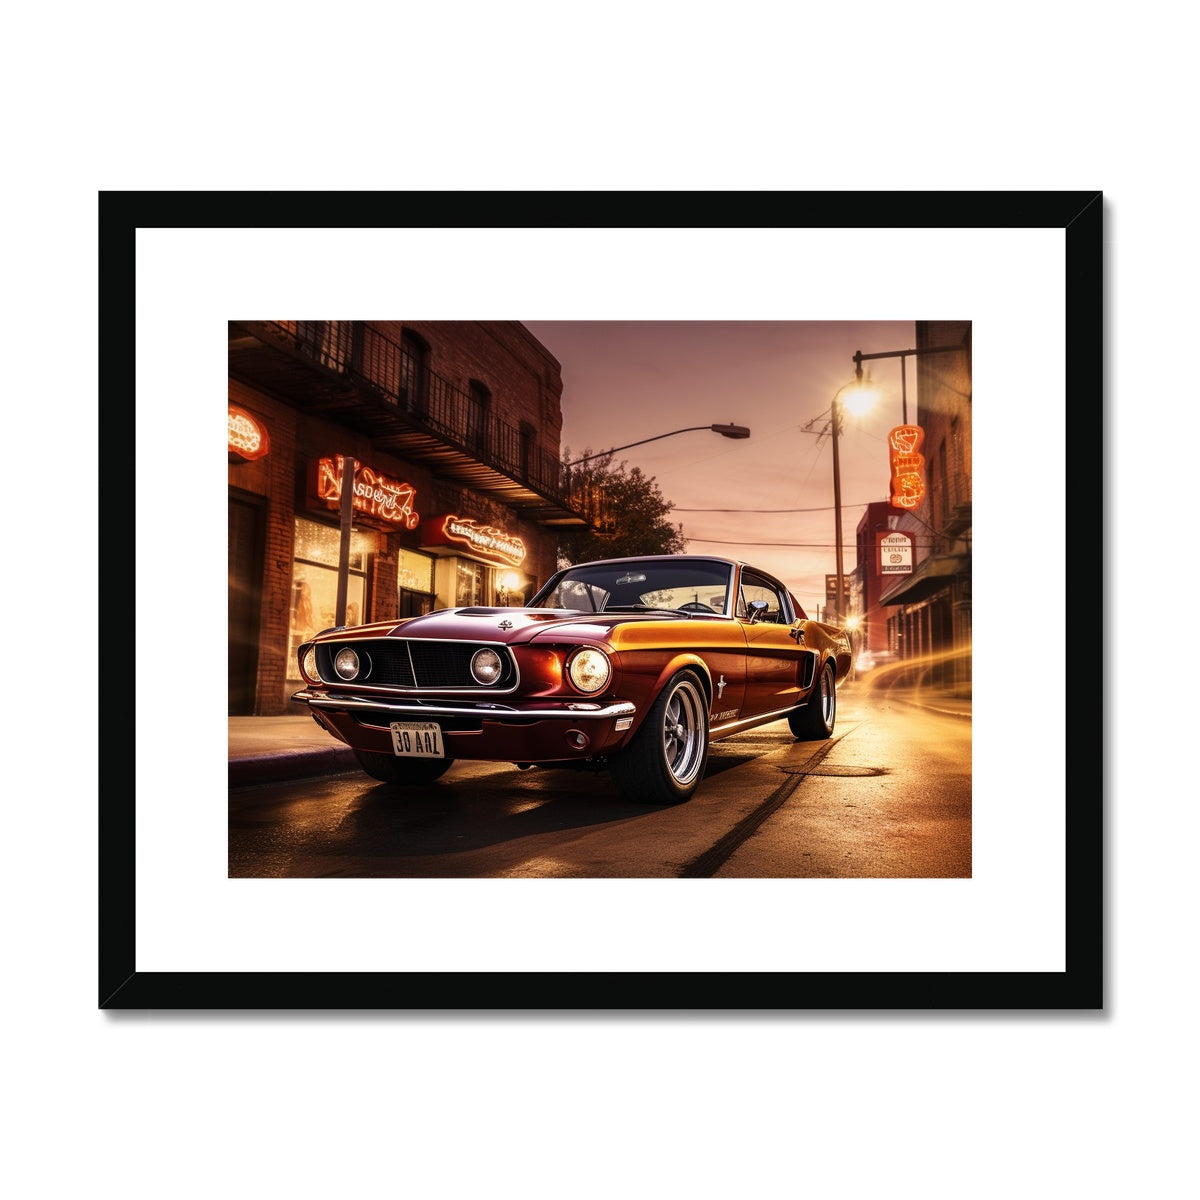 Vintage Mustang, Wild West, Texas Framed & Mounted Print